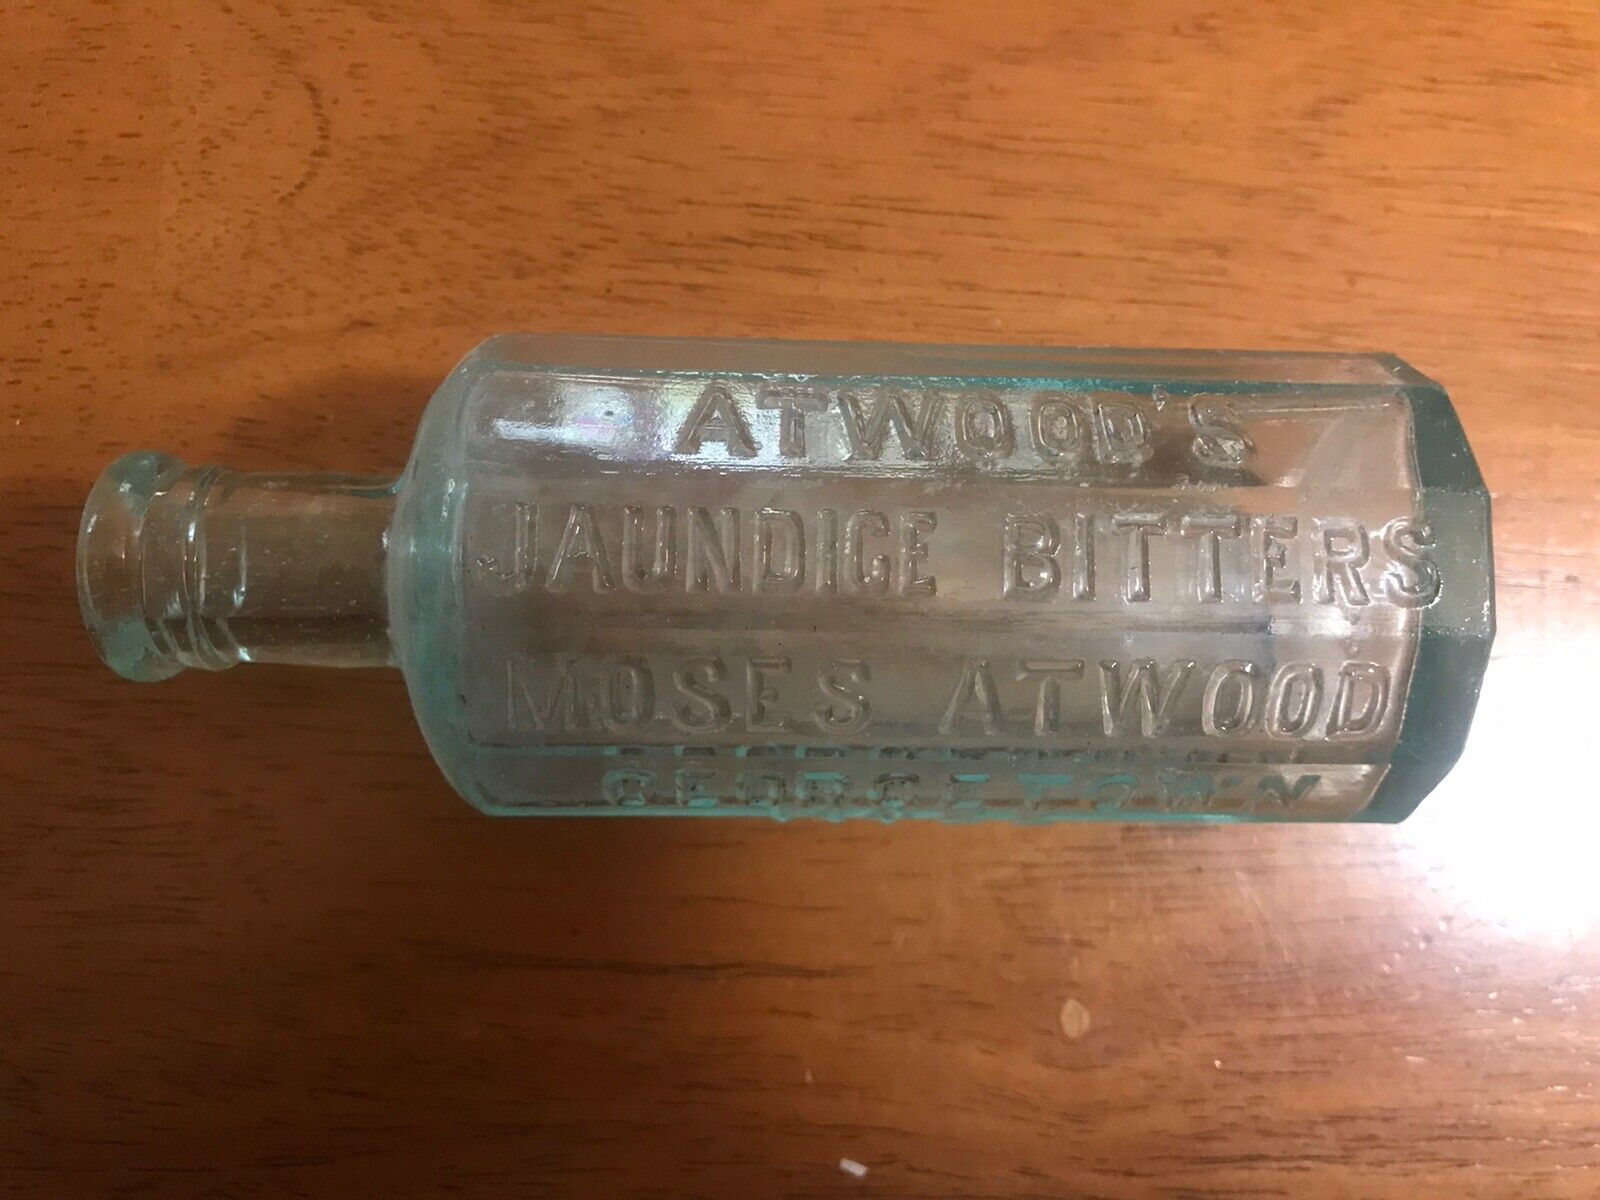 ANTIQUE BITTERS BOTTLE 1890s ATWOOD’S JAUNDICE  GEORGETOWN MASS